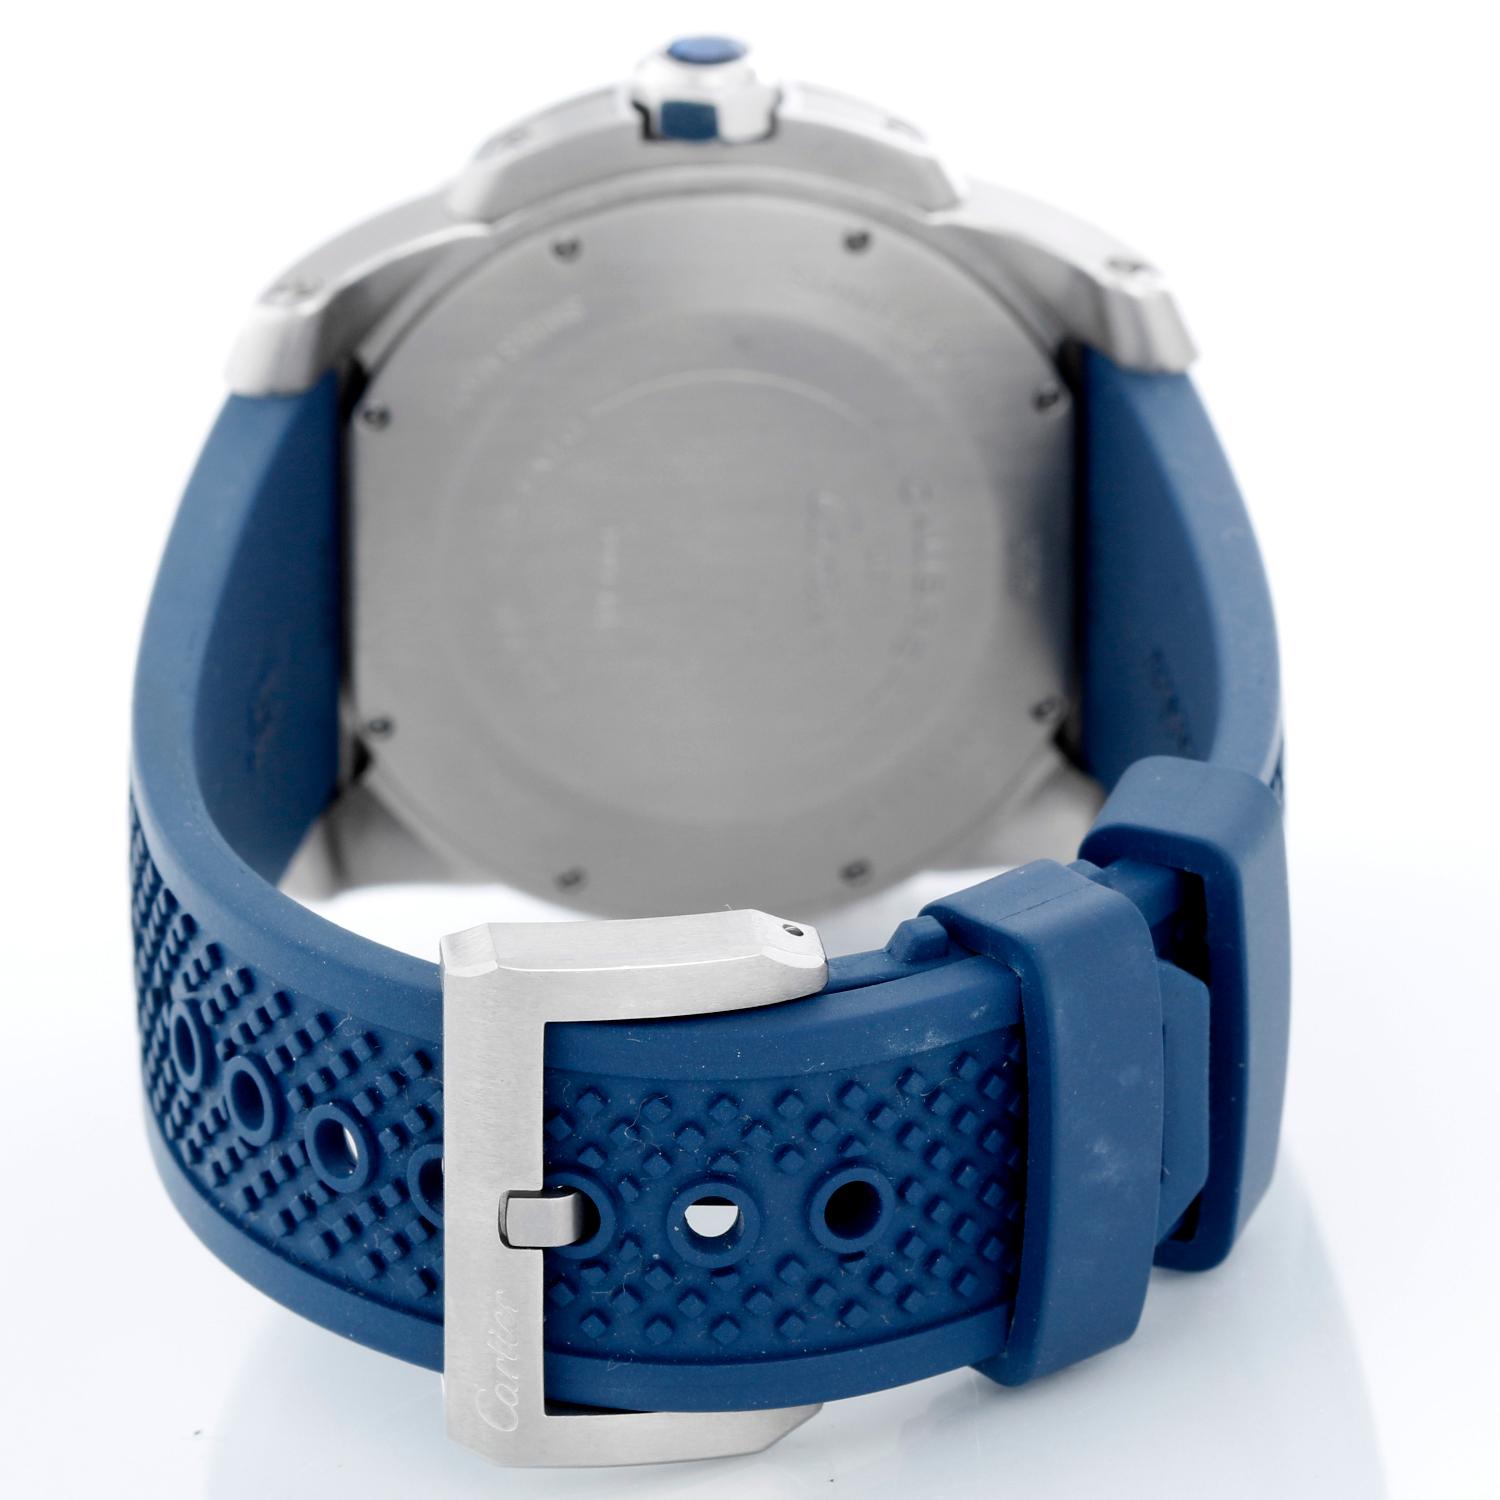 Calibre de Diver Cartier Men's Stainless Steel  Watch WSCA0011 - Automatic winding. Stainless Steel  (42mm diameter). Blue dial with white Roman numerals and stick markers; date at 3 o'clock, subseconds at 6 o'clock. Blue rubber strap with Cartier